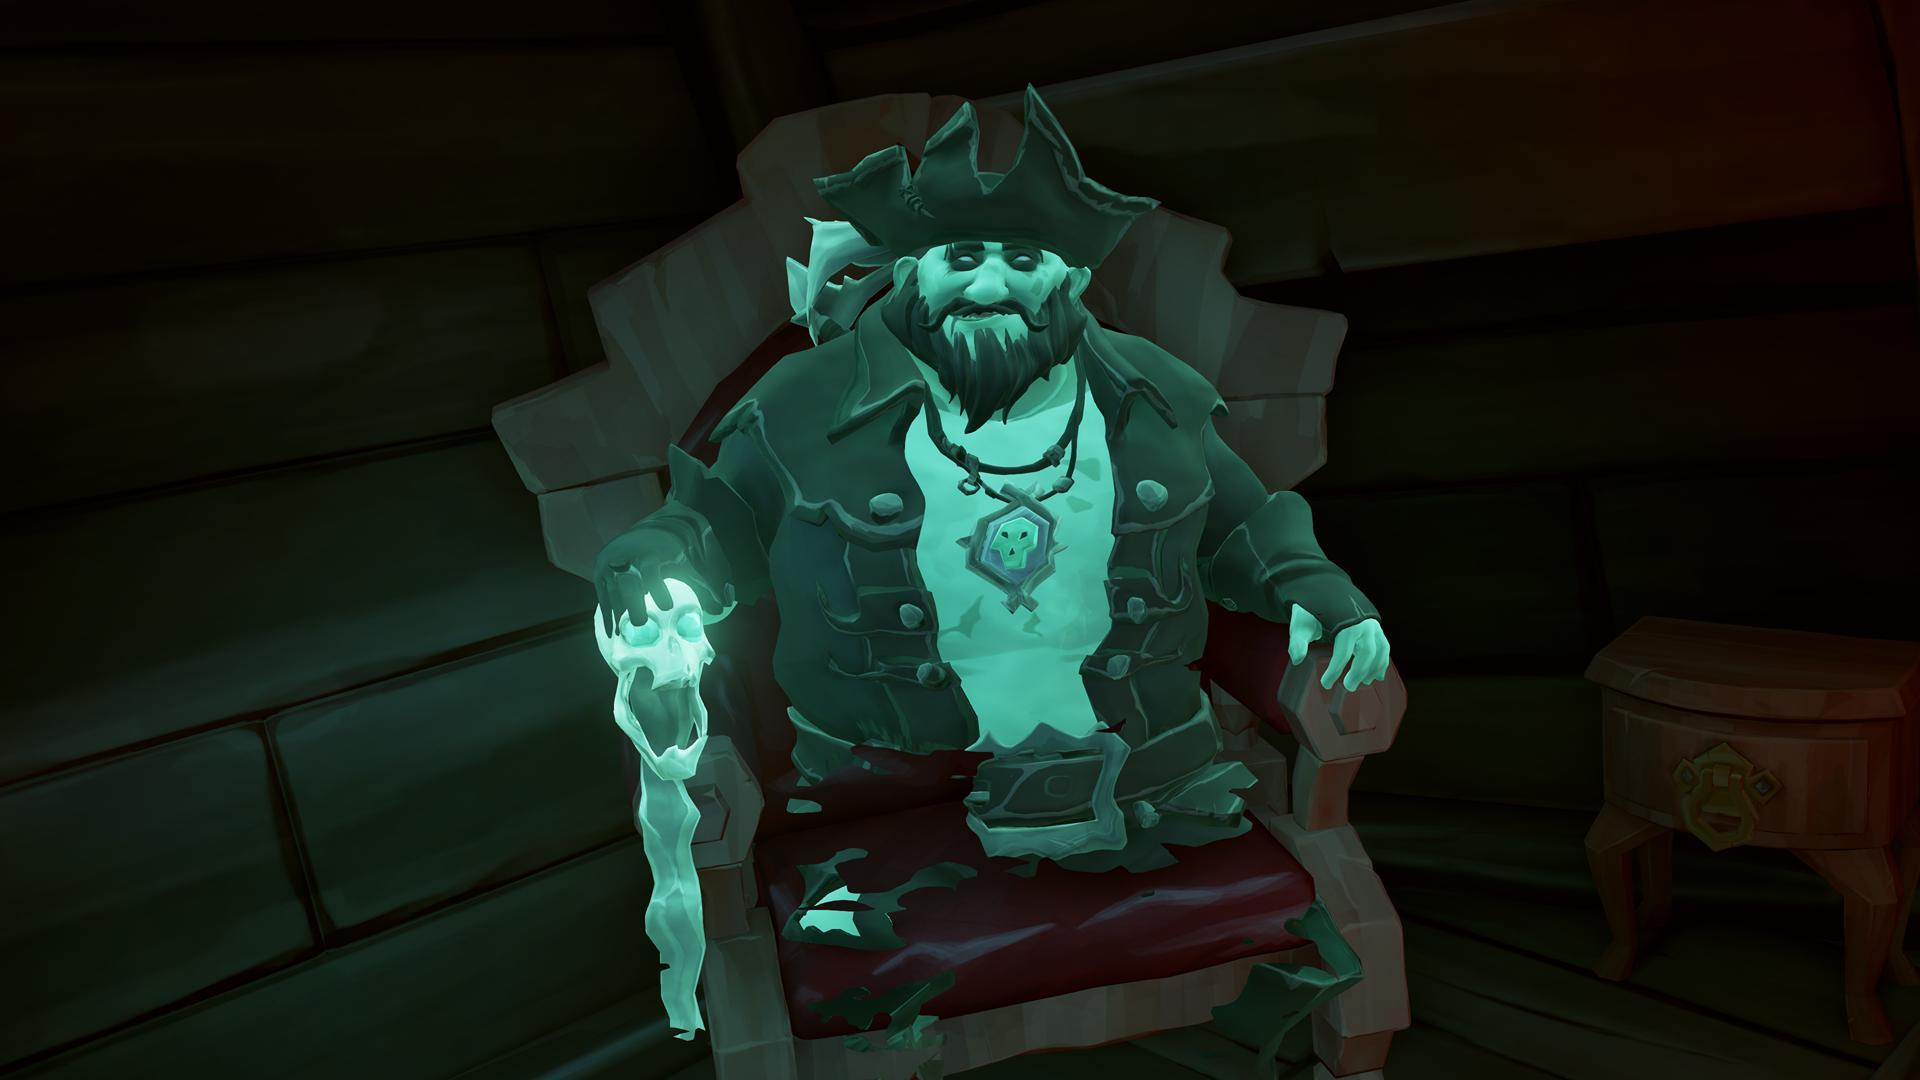 The Pirate Lord